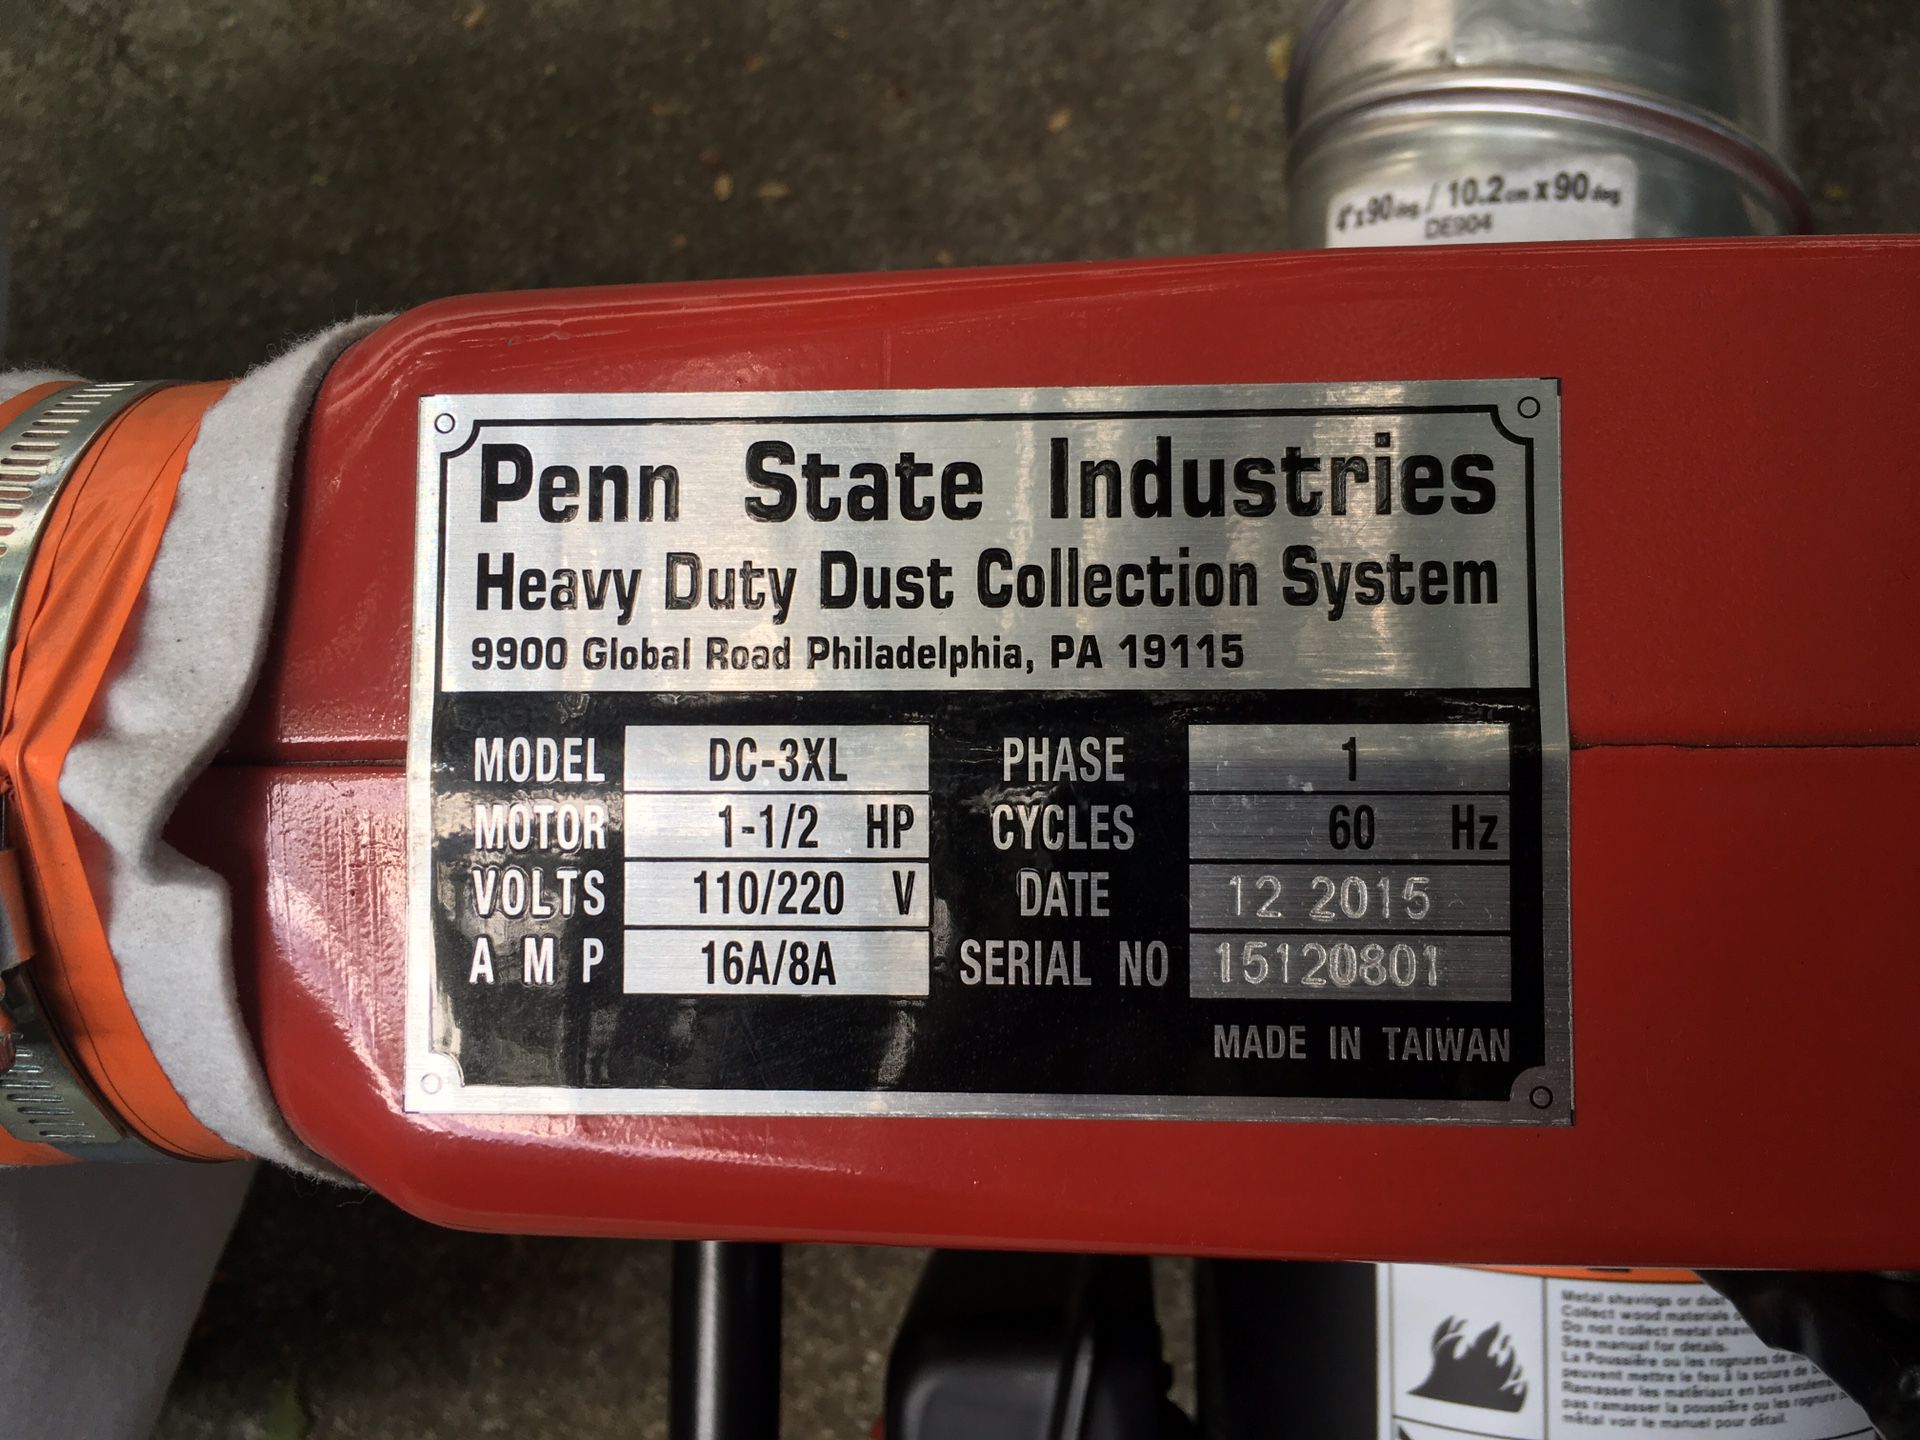 Heavy duty vacuum / dust collector - Penn State Industries DC-3XL